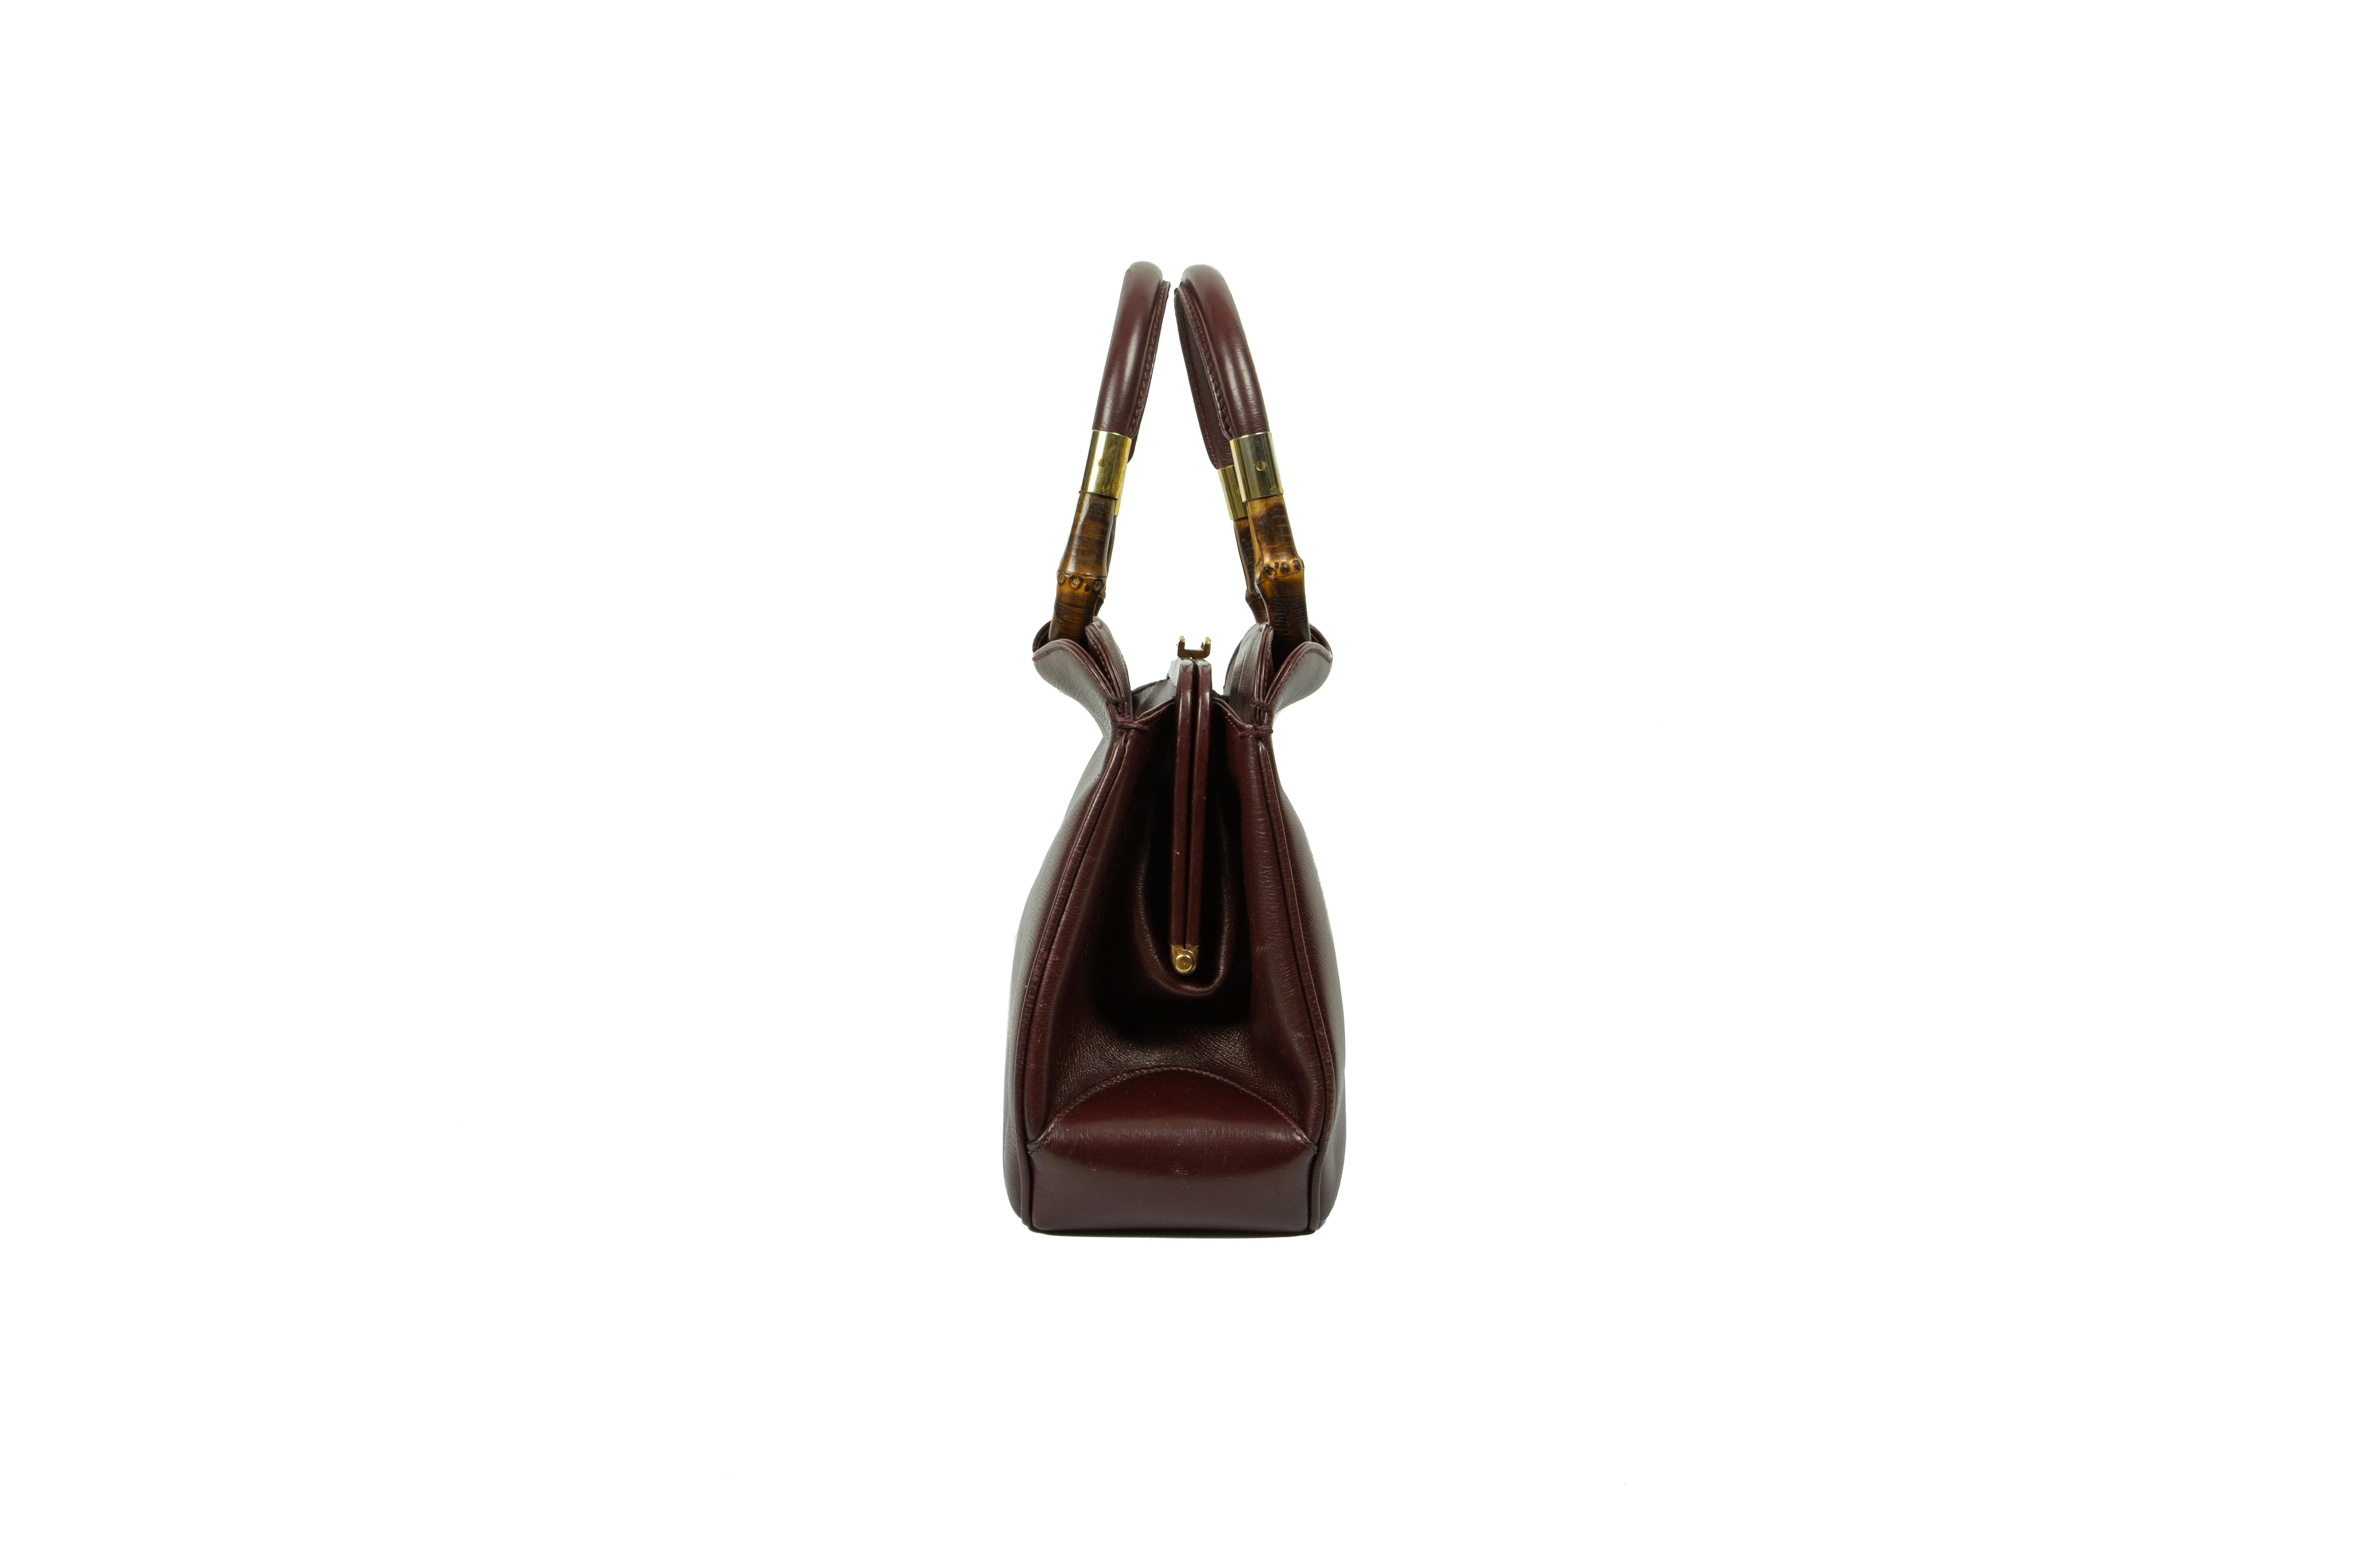 A rare late 1970s Gucci oxblood grained leather handbag comprising of three compartments, the central one with a gusseted crest-toggle zipper pocket, one patch pocket and two further gusseted pockets, mounted on a self-covered frame with curved